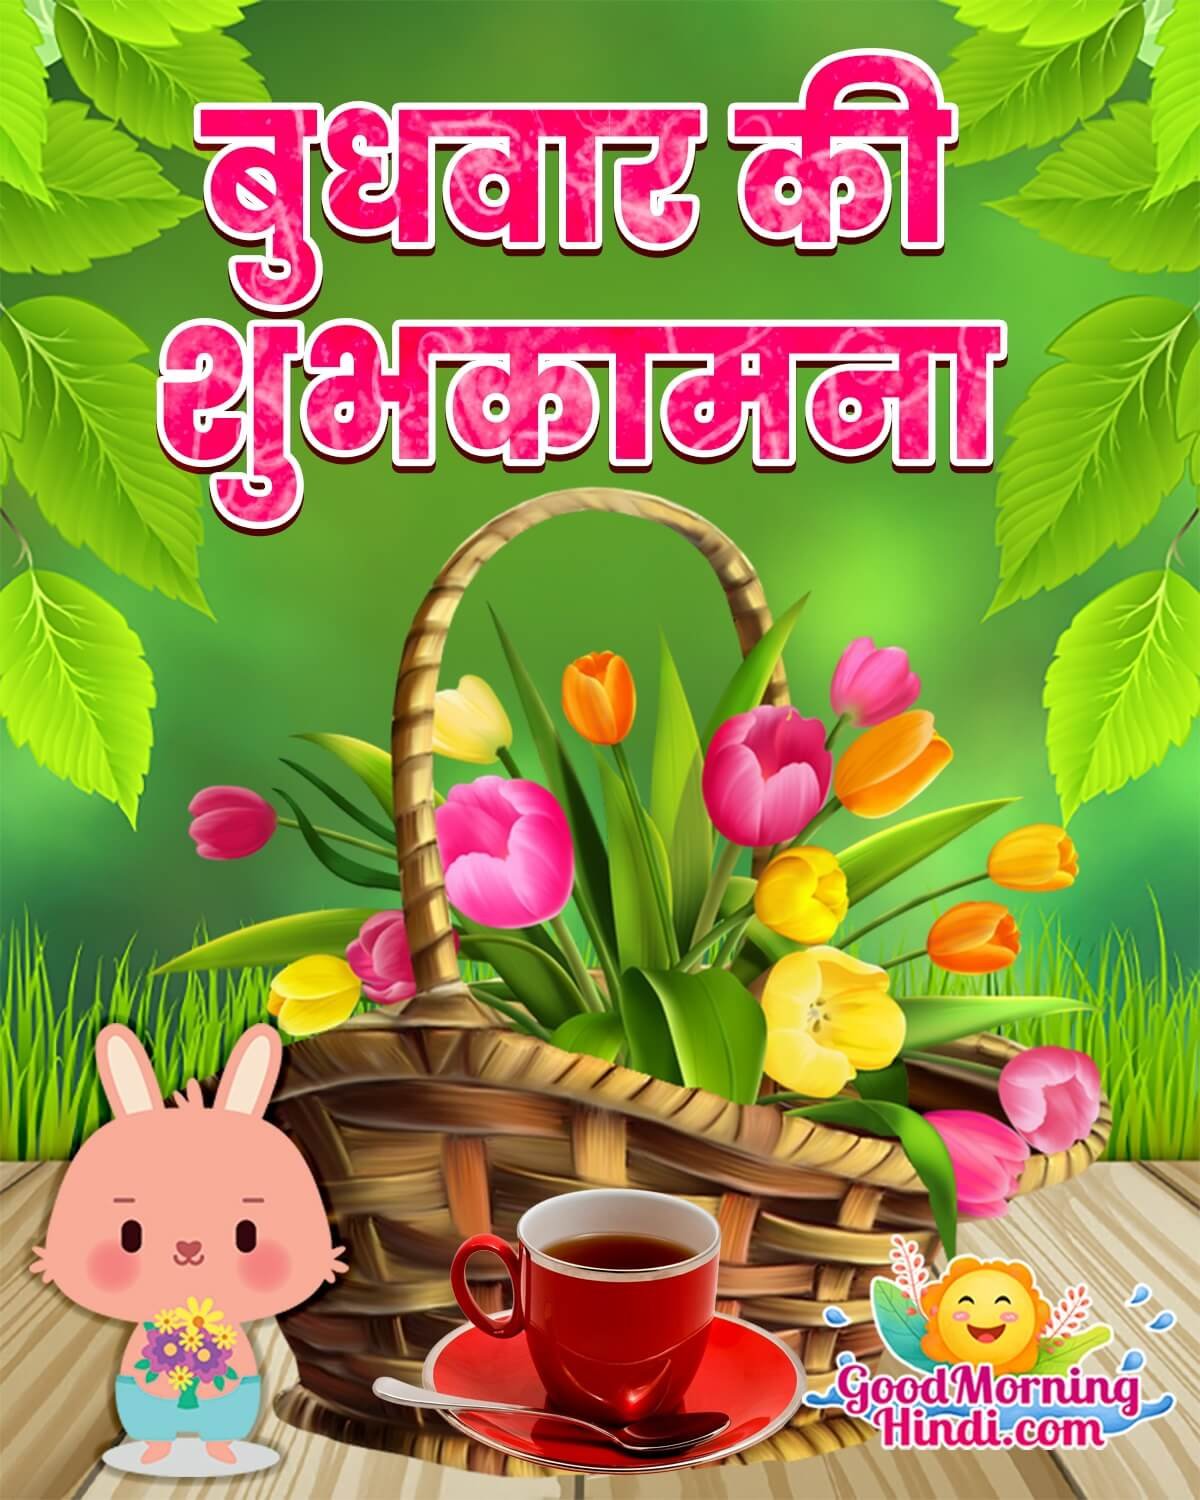 Good Morning Happy Wednesday Images In Hindi - Good Morning Wishes ...